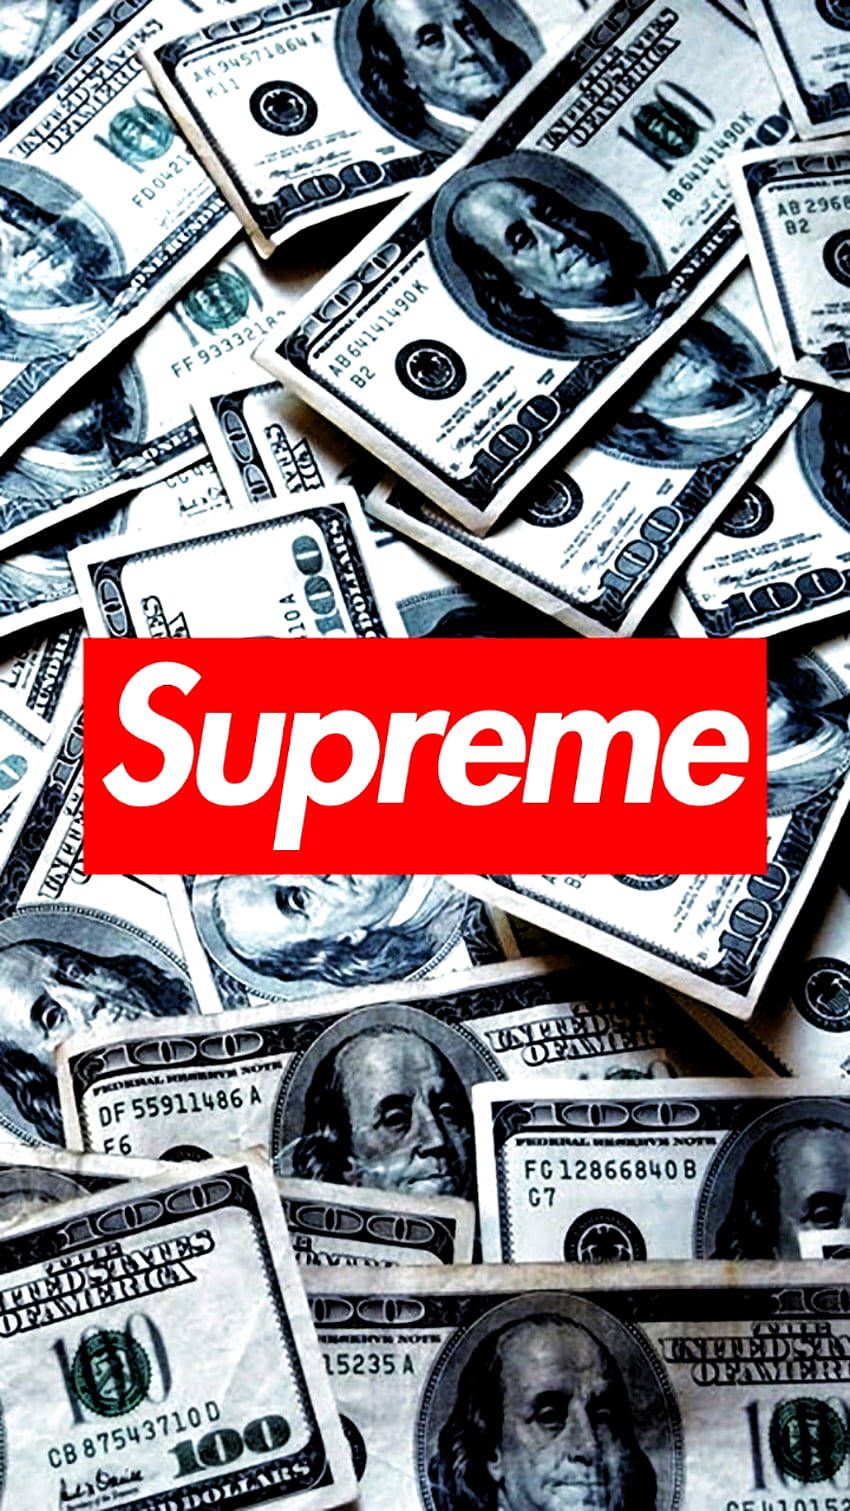 Supreme's newest collaboration is with the us dollar - Supreme, money